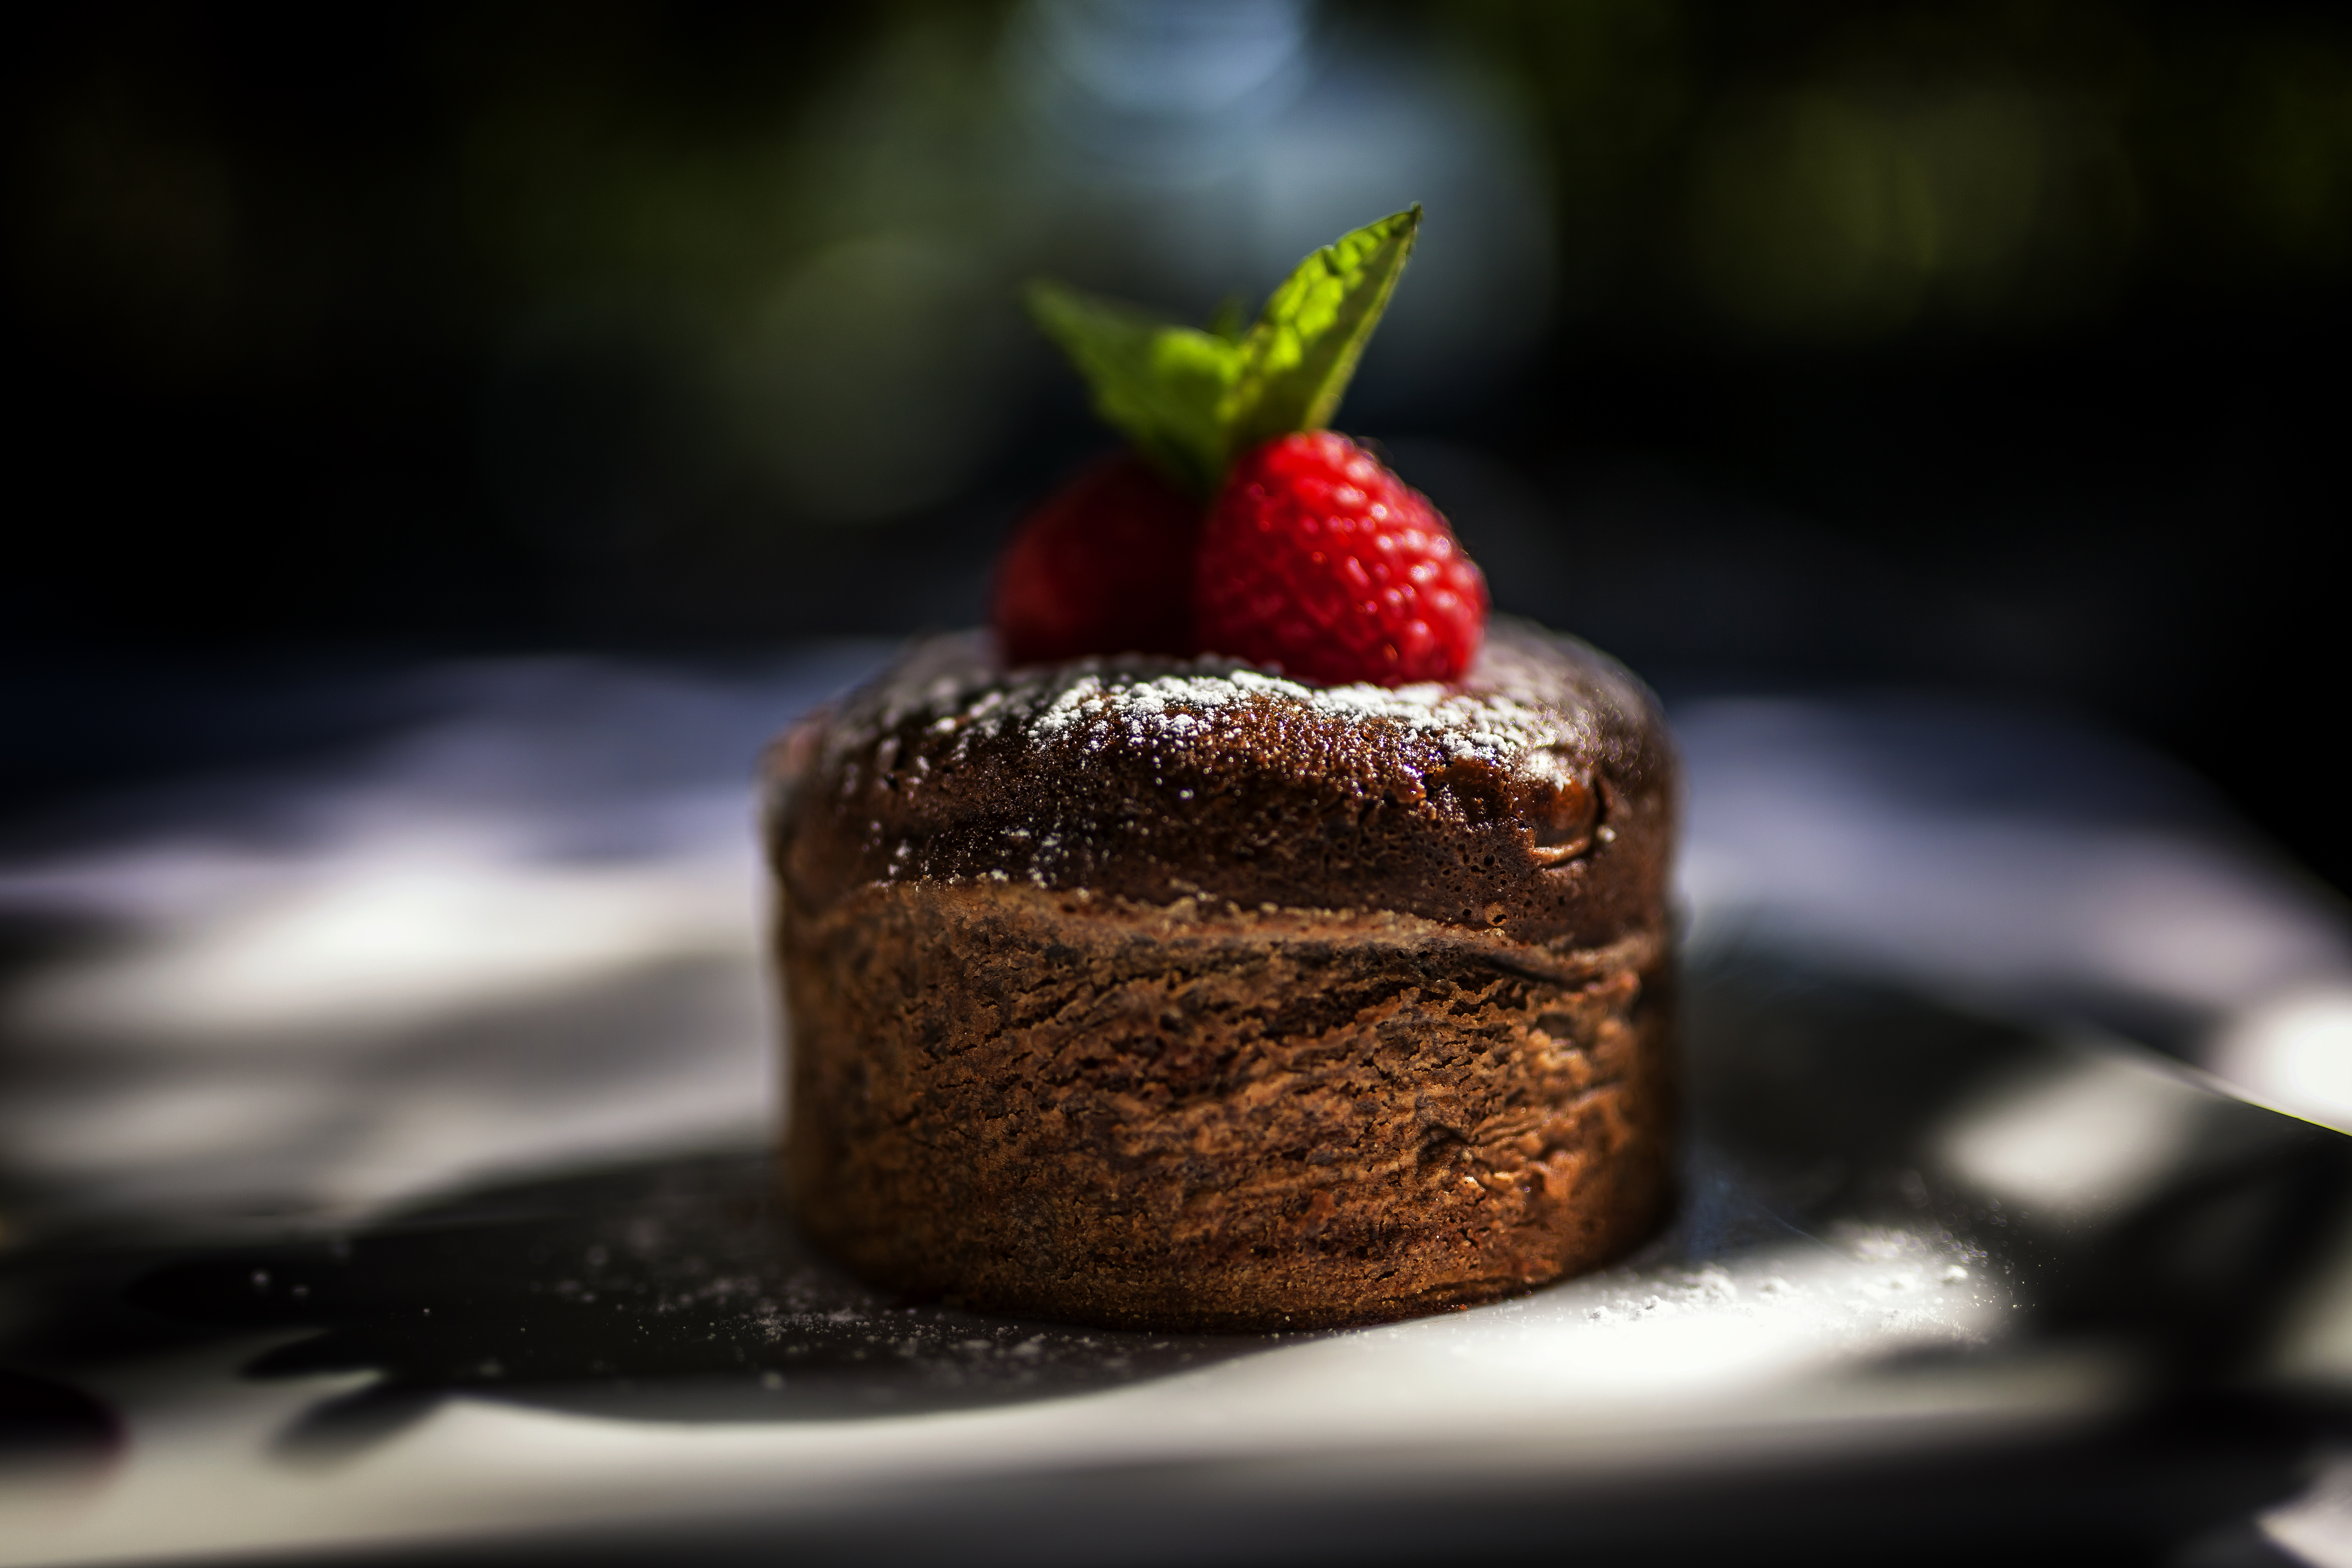 A chocolate cake dessert | Source: Getty Images